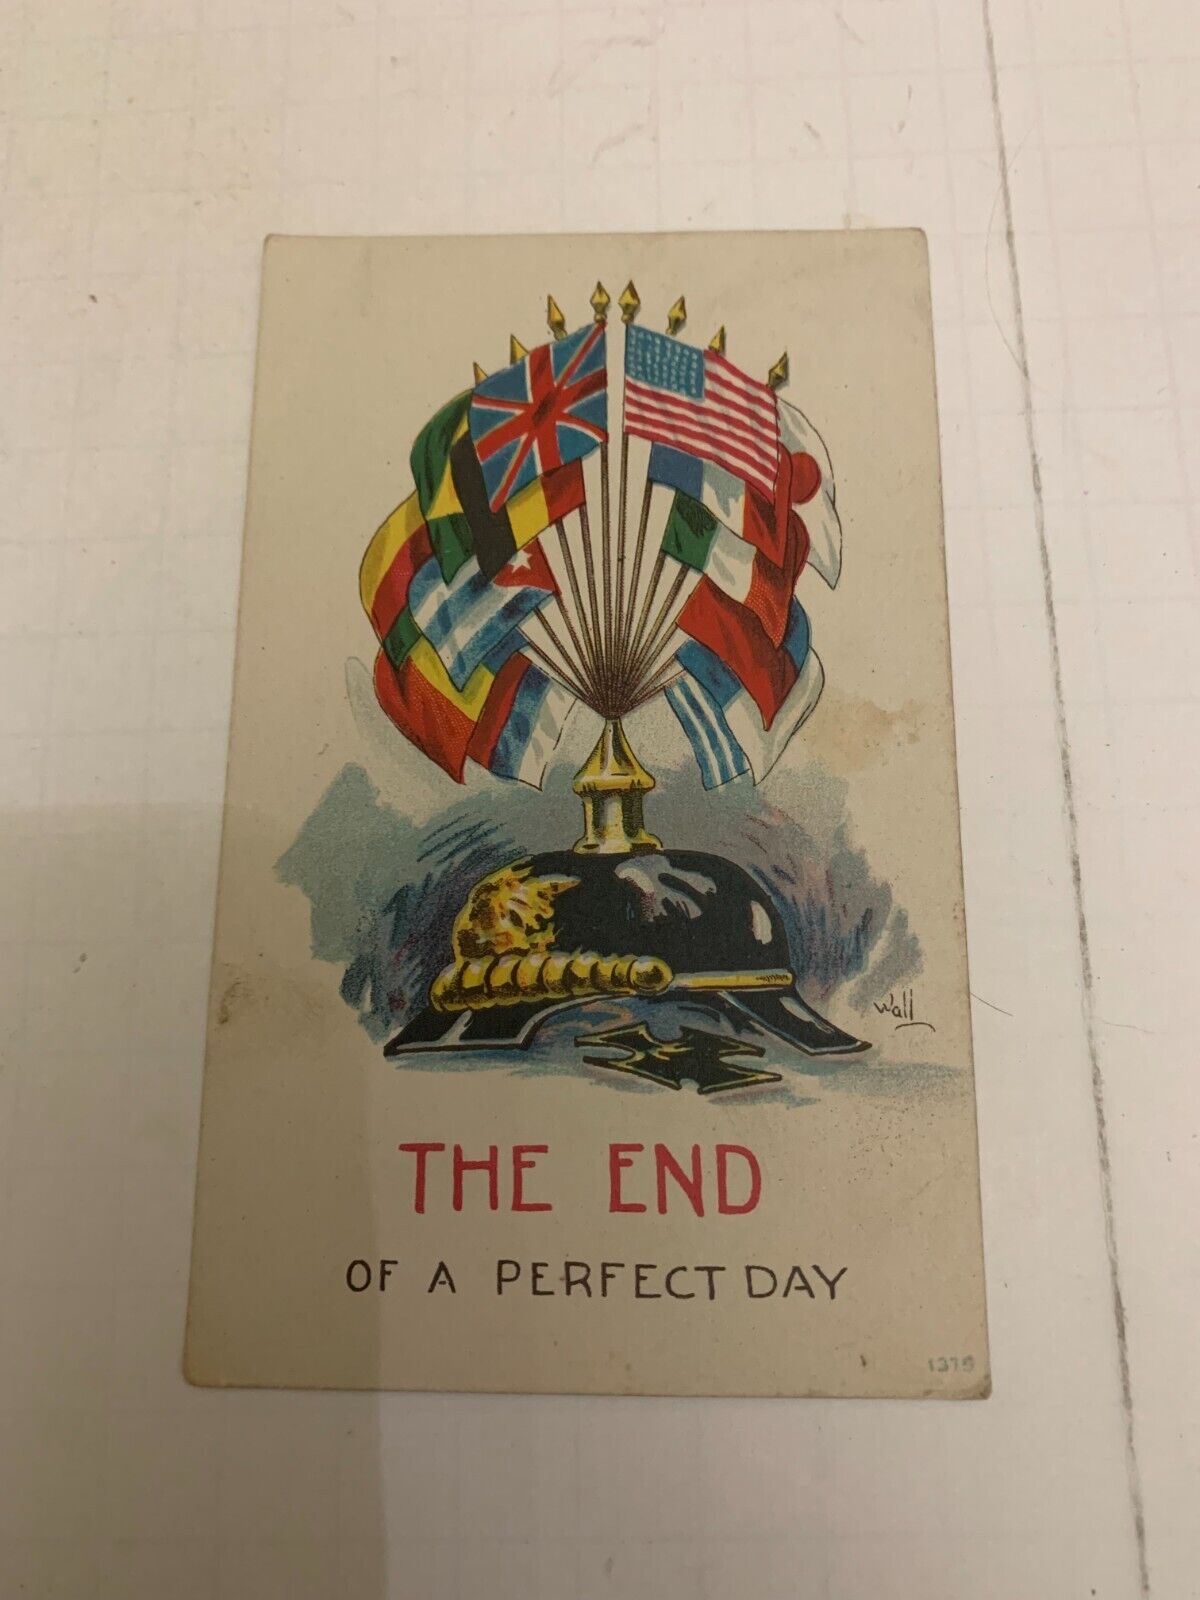 c.1918 WWI The End Of A Perfect Day Patriotic Military Artist Postcard